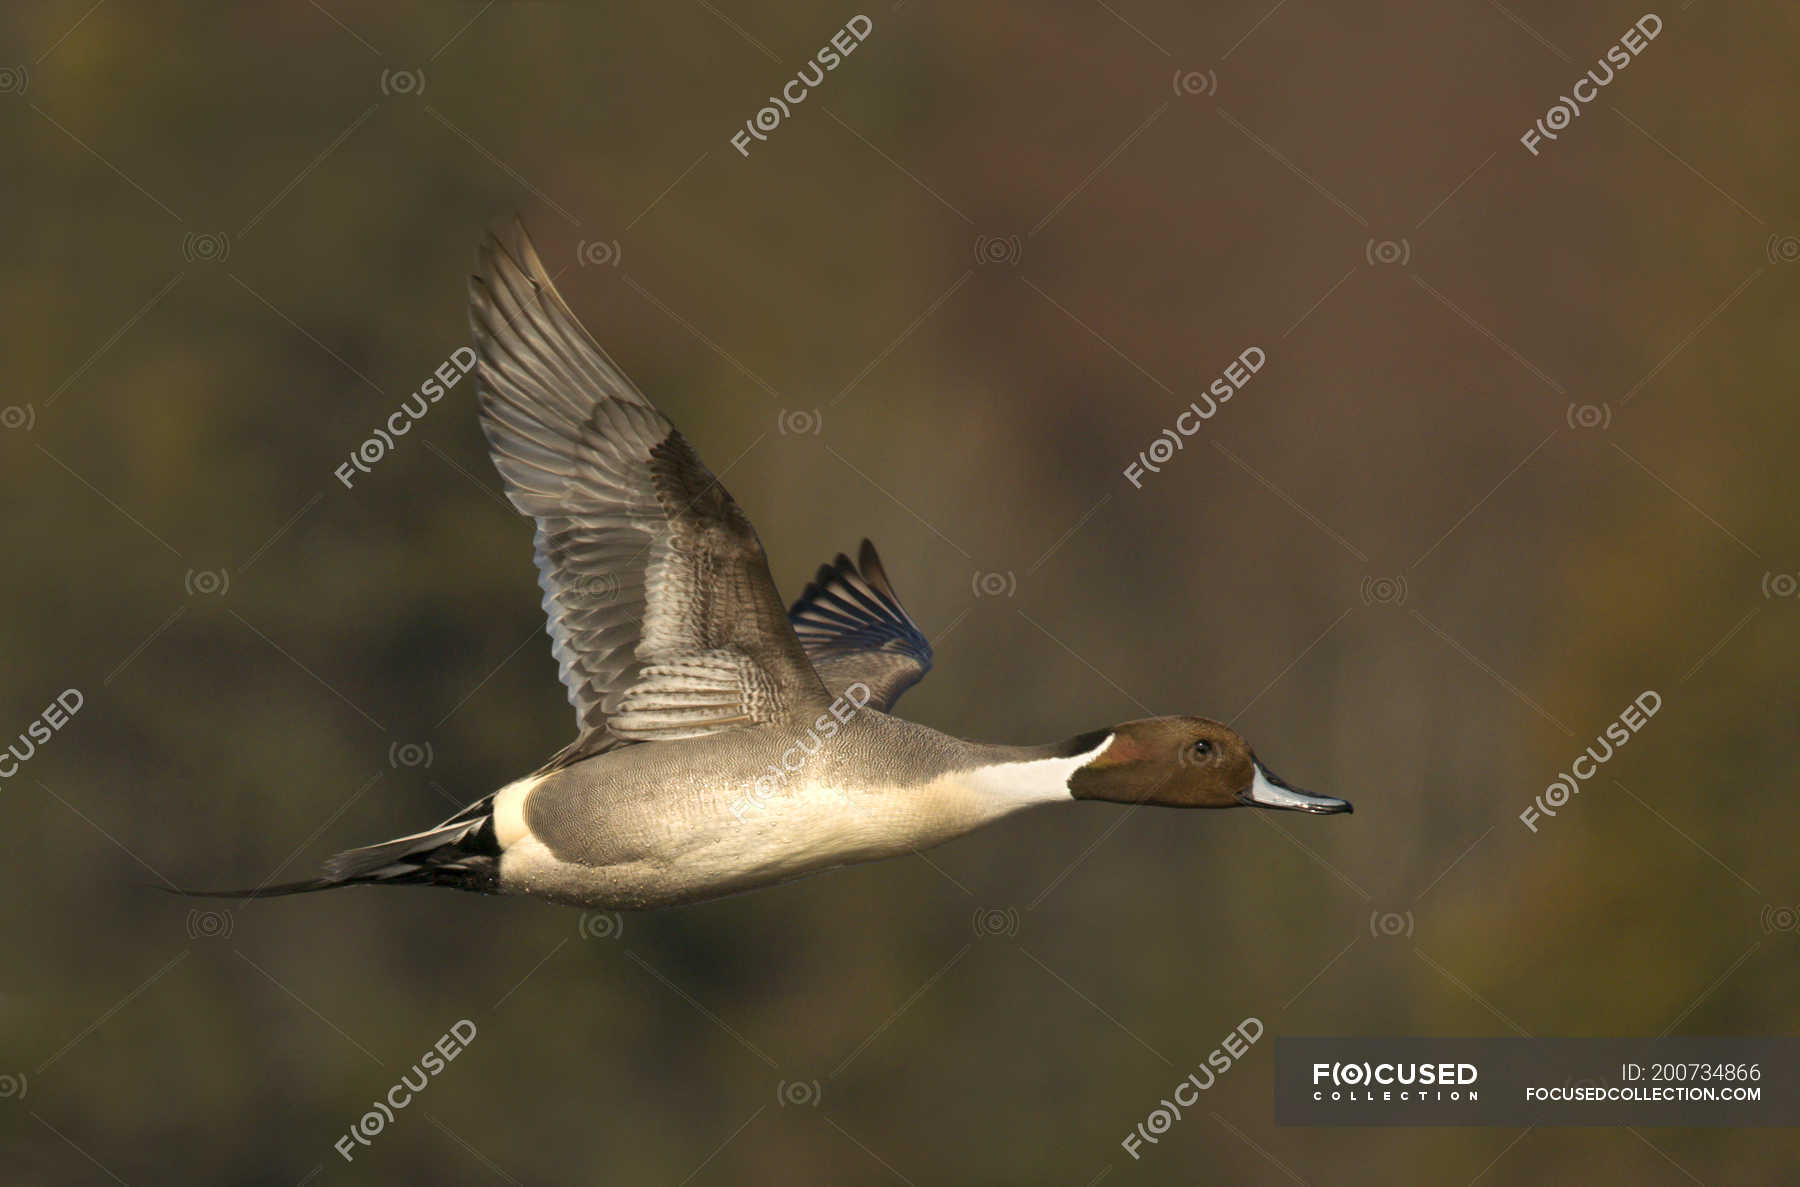 pintail flying